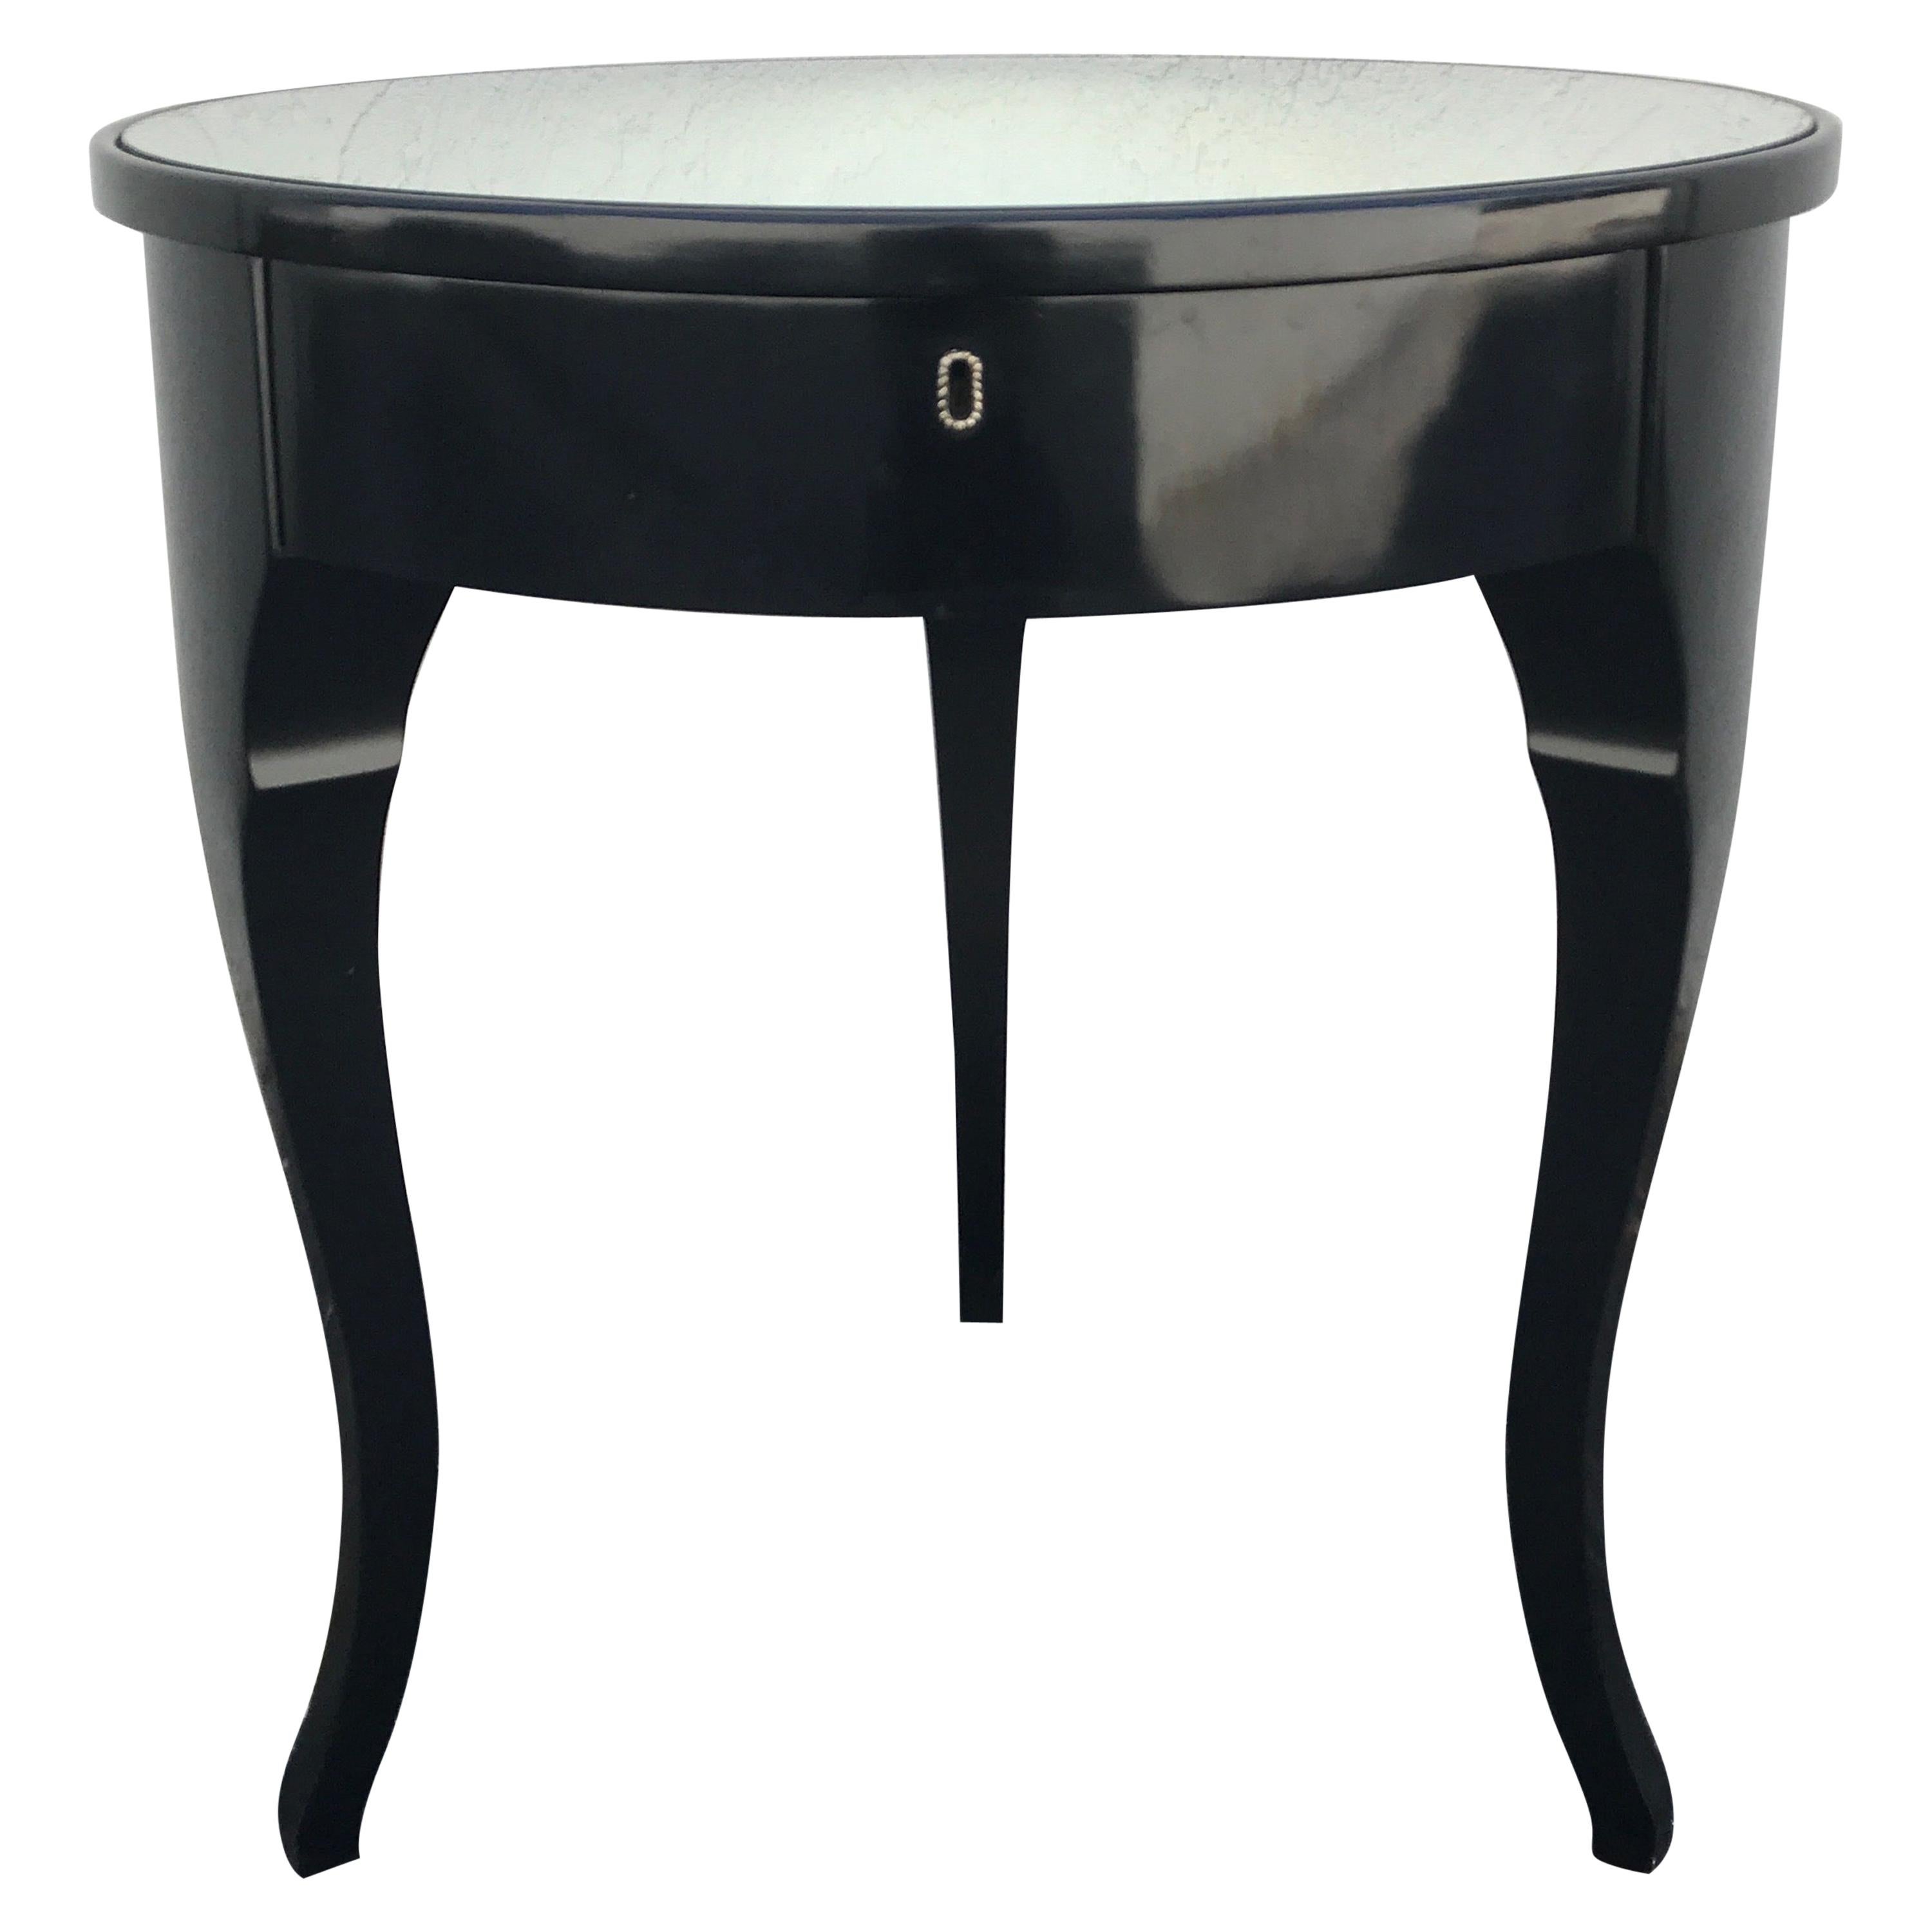 Black Lacquer Charles X Style Round Mirrored Top Side Table by Ralph Lauren